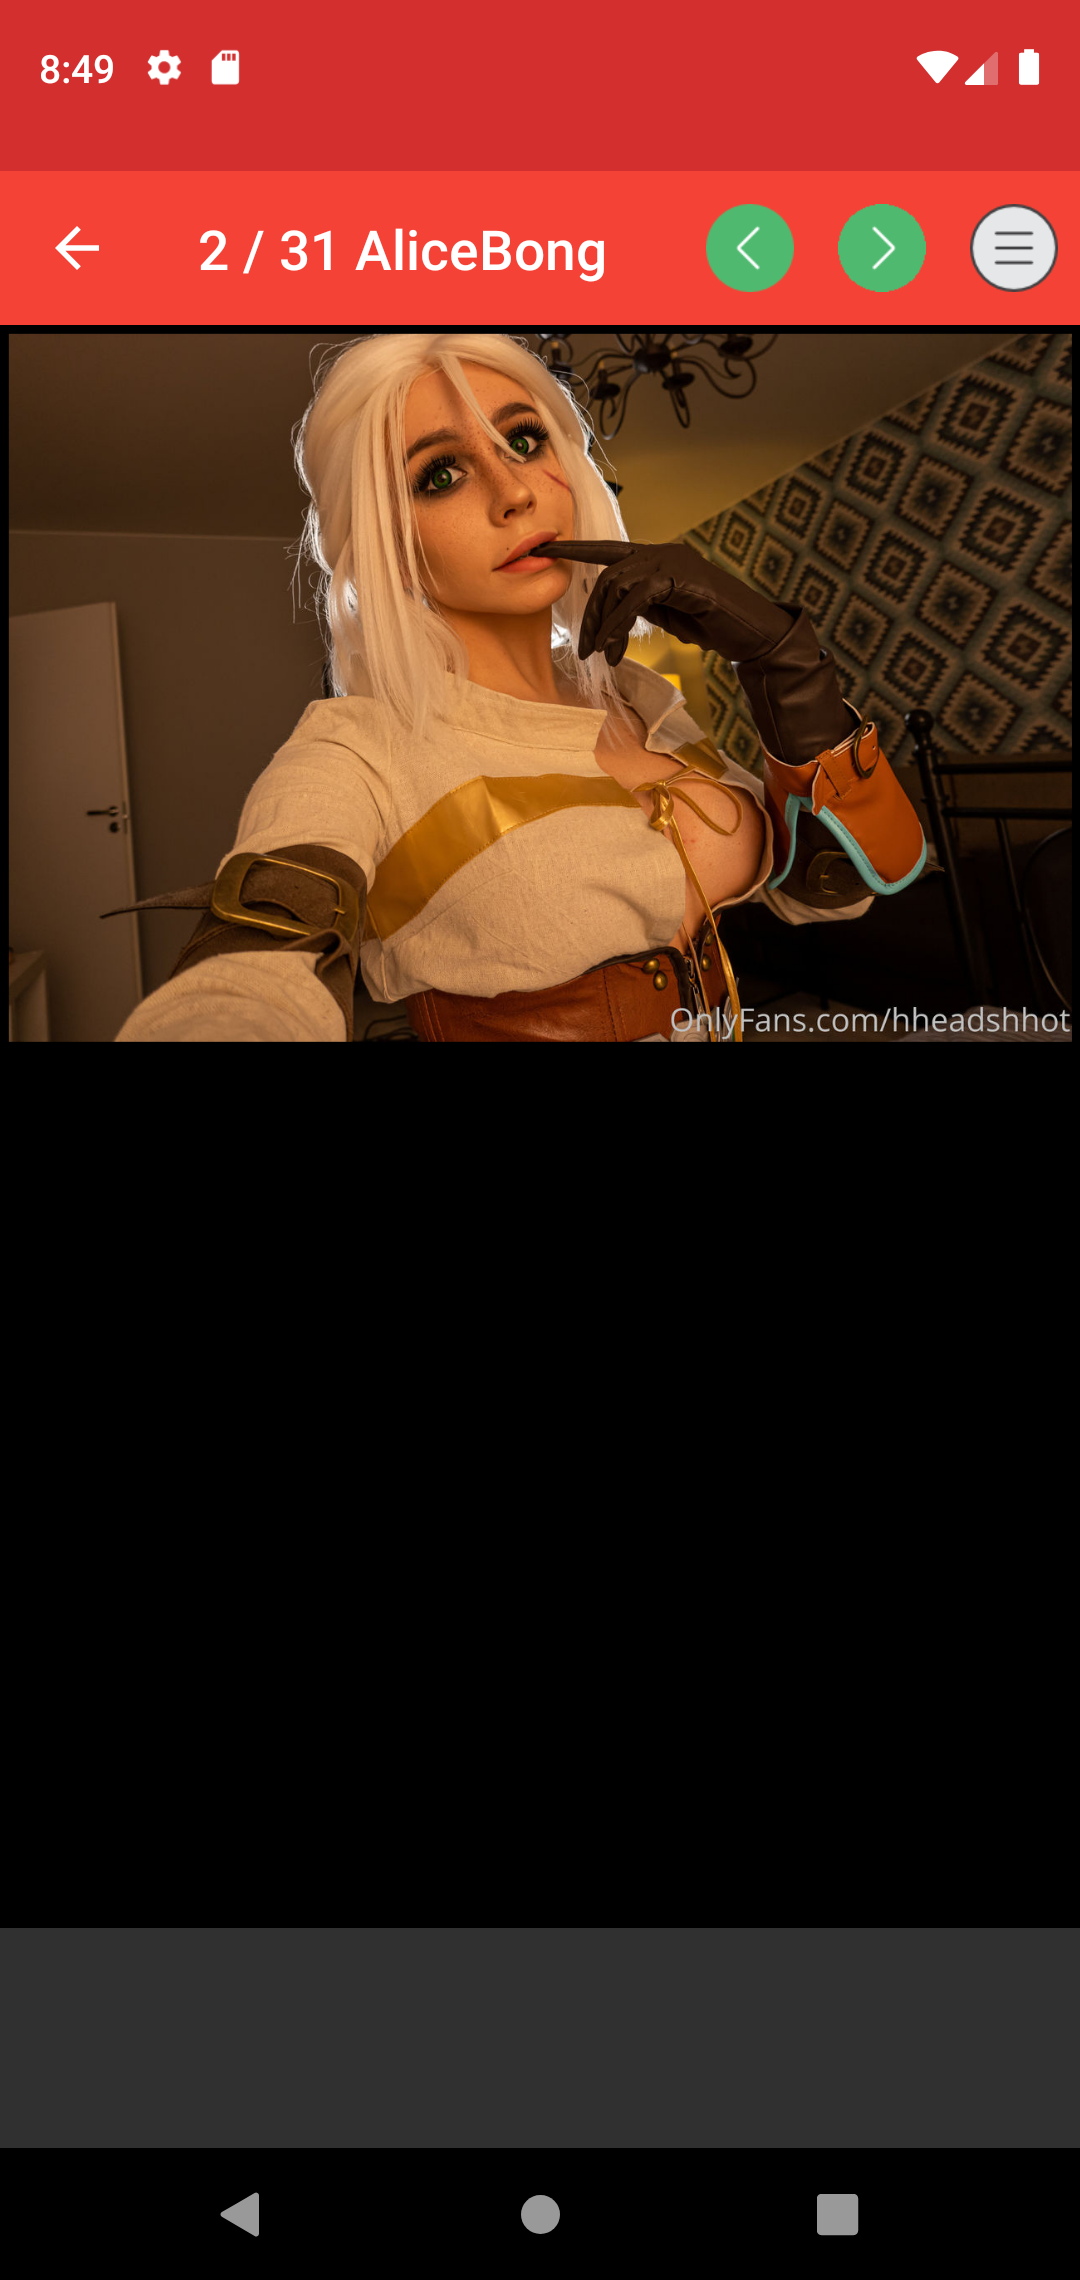 Witcher Cosplays images,mature,manga,cosplay,apk,android,erotic,sexy,app,witcher,hentai,apps,hotebonypics,porn,best,adult,gallery,xxx,pron,anime,hot,sexgalleries,picture,comics